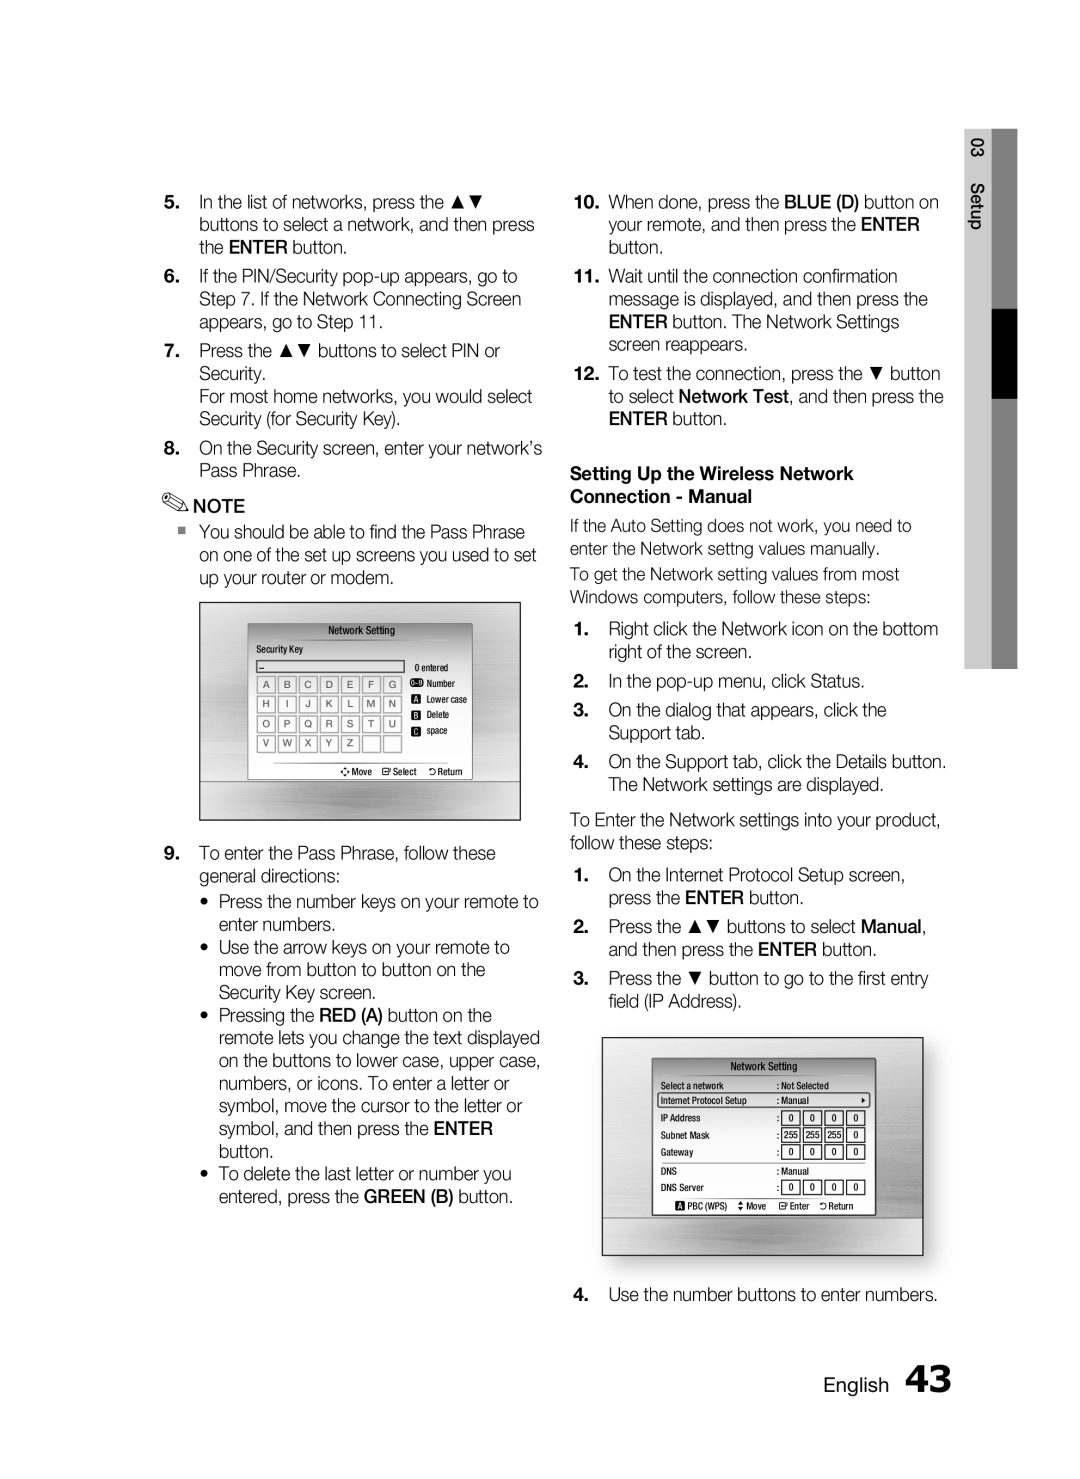 Samsung C6600 user manual English, Setting Up the Wireless Network, Connection - Manual 